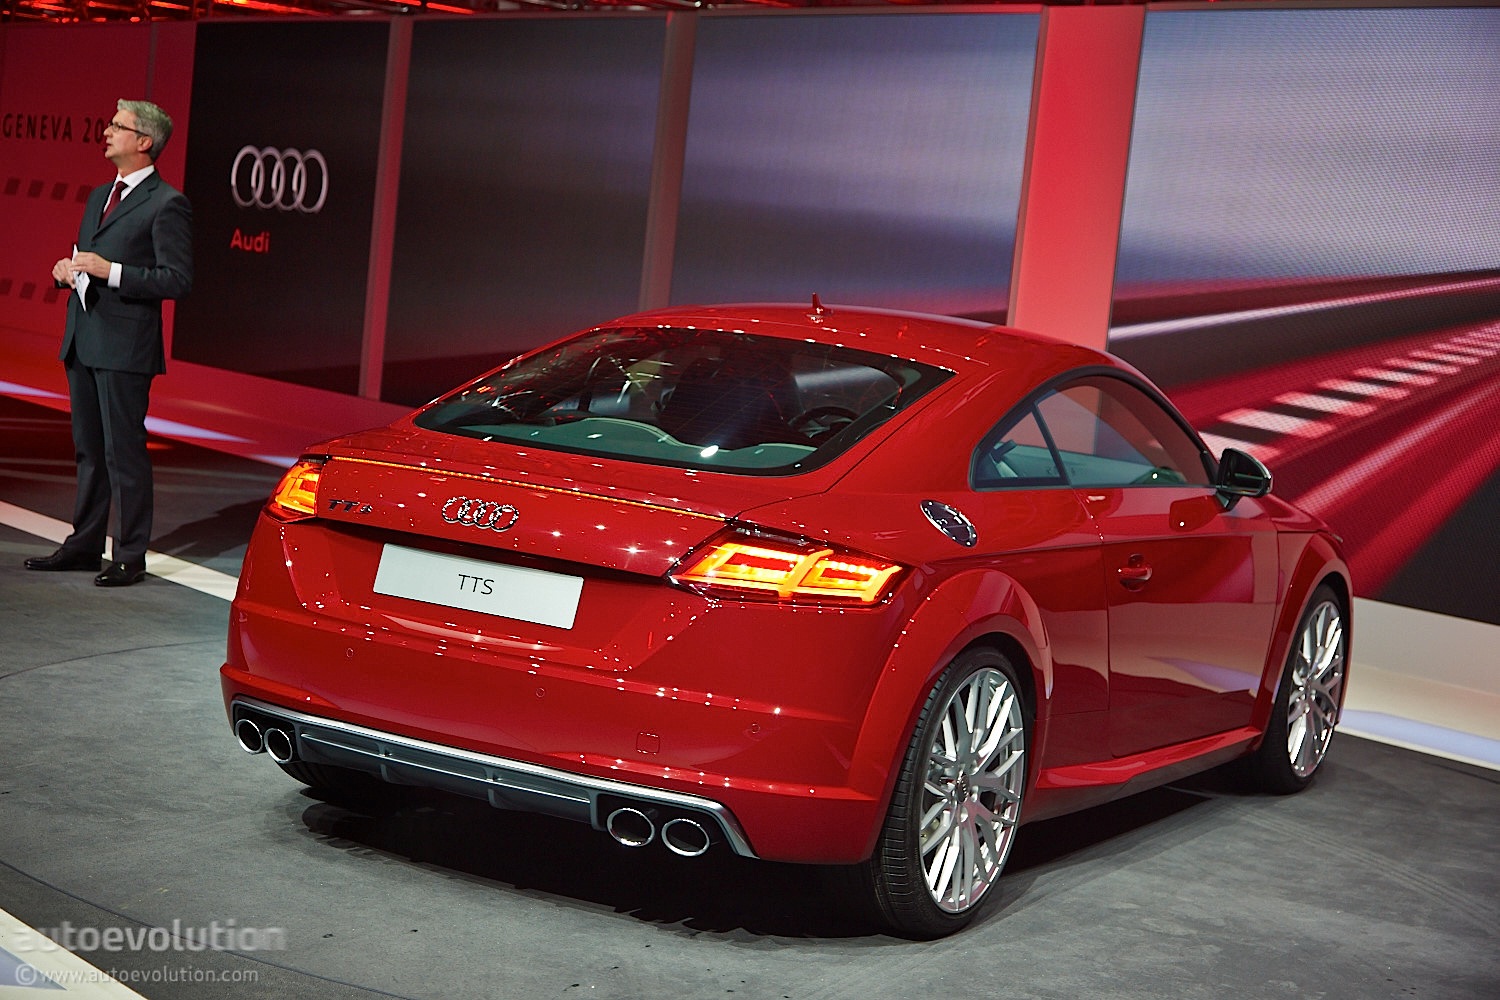 New Audi TT Coupes Get Evolutionary Styling and Impressive Engines [Live Photos] -